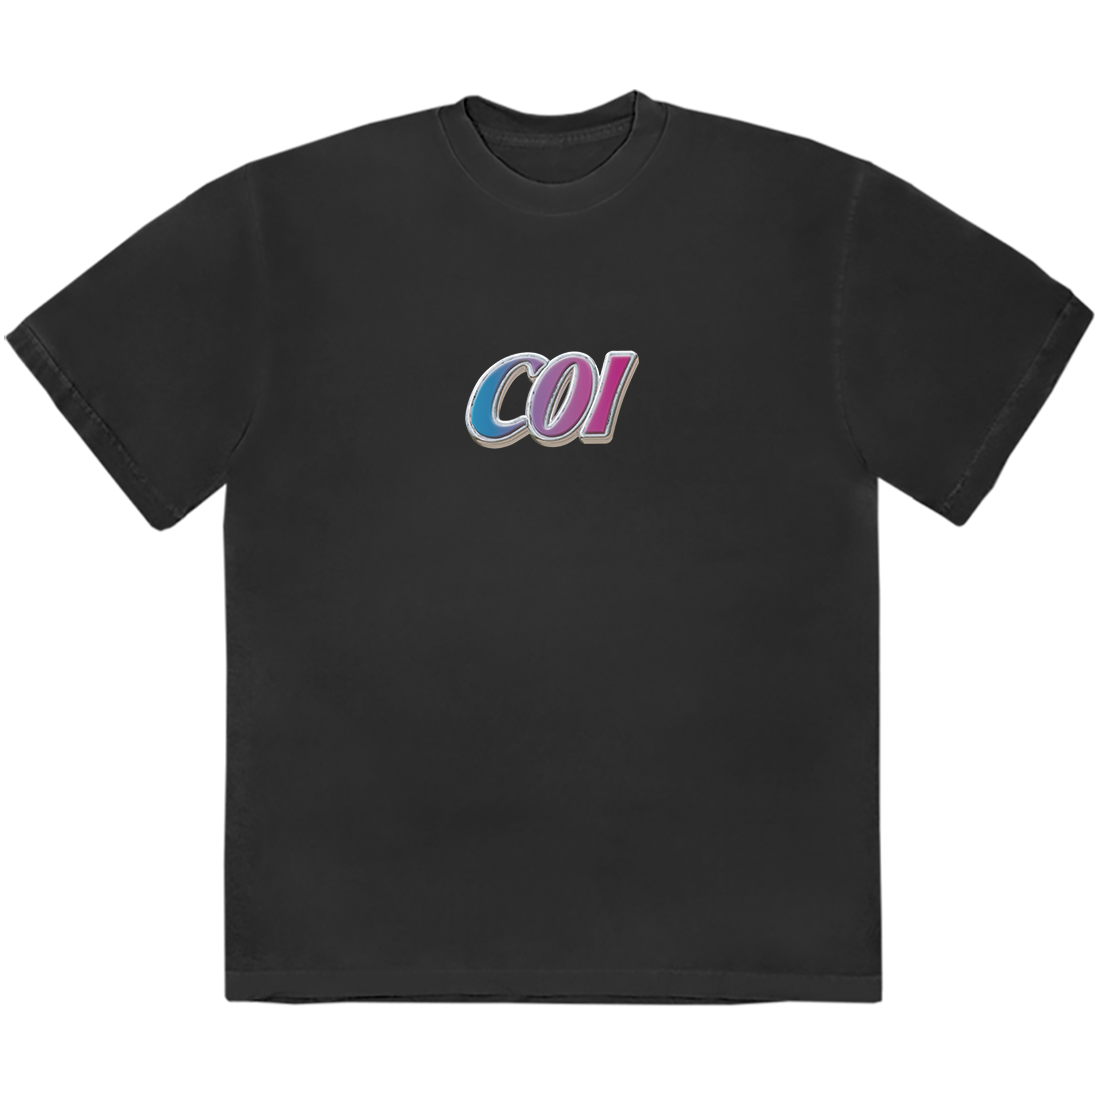 COI T-SHIRT I Front